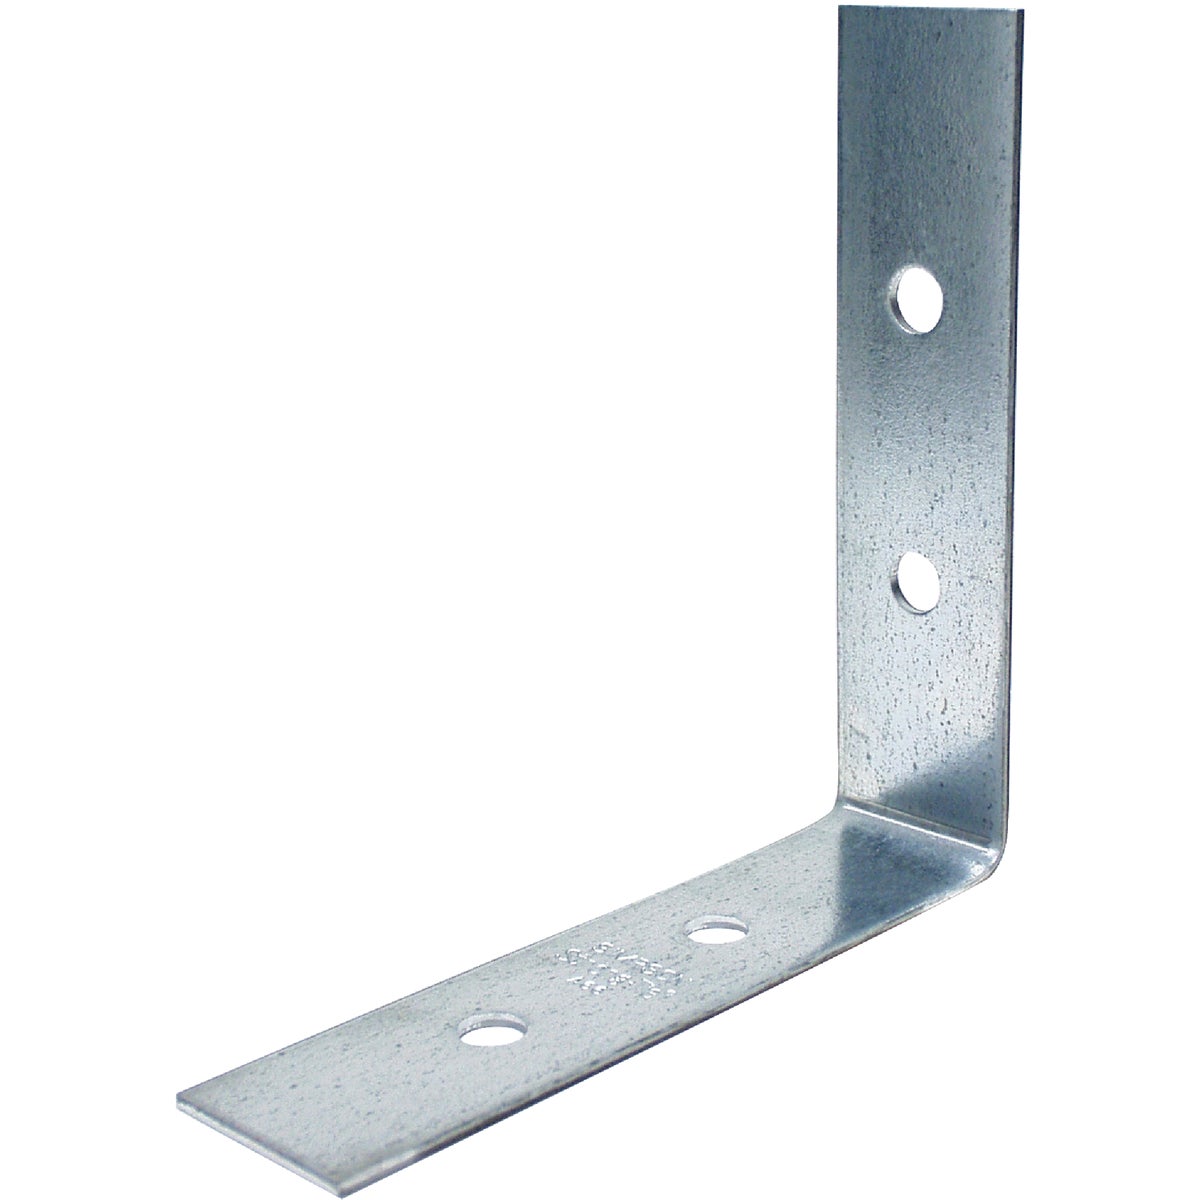 Simpson Strong-Tie A66 Simpson Strong-Tie 5-7/8 In. x 5-7/8 In. x 1-1/2 In. Galvanized Steel 12 ga Reinforcing Angle A66